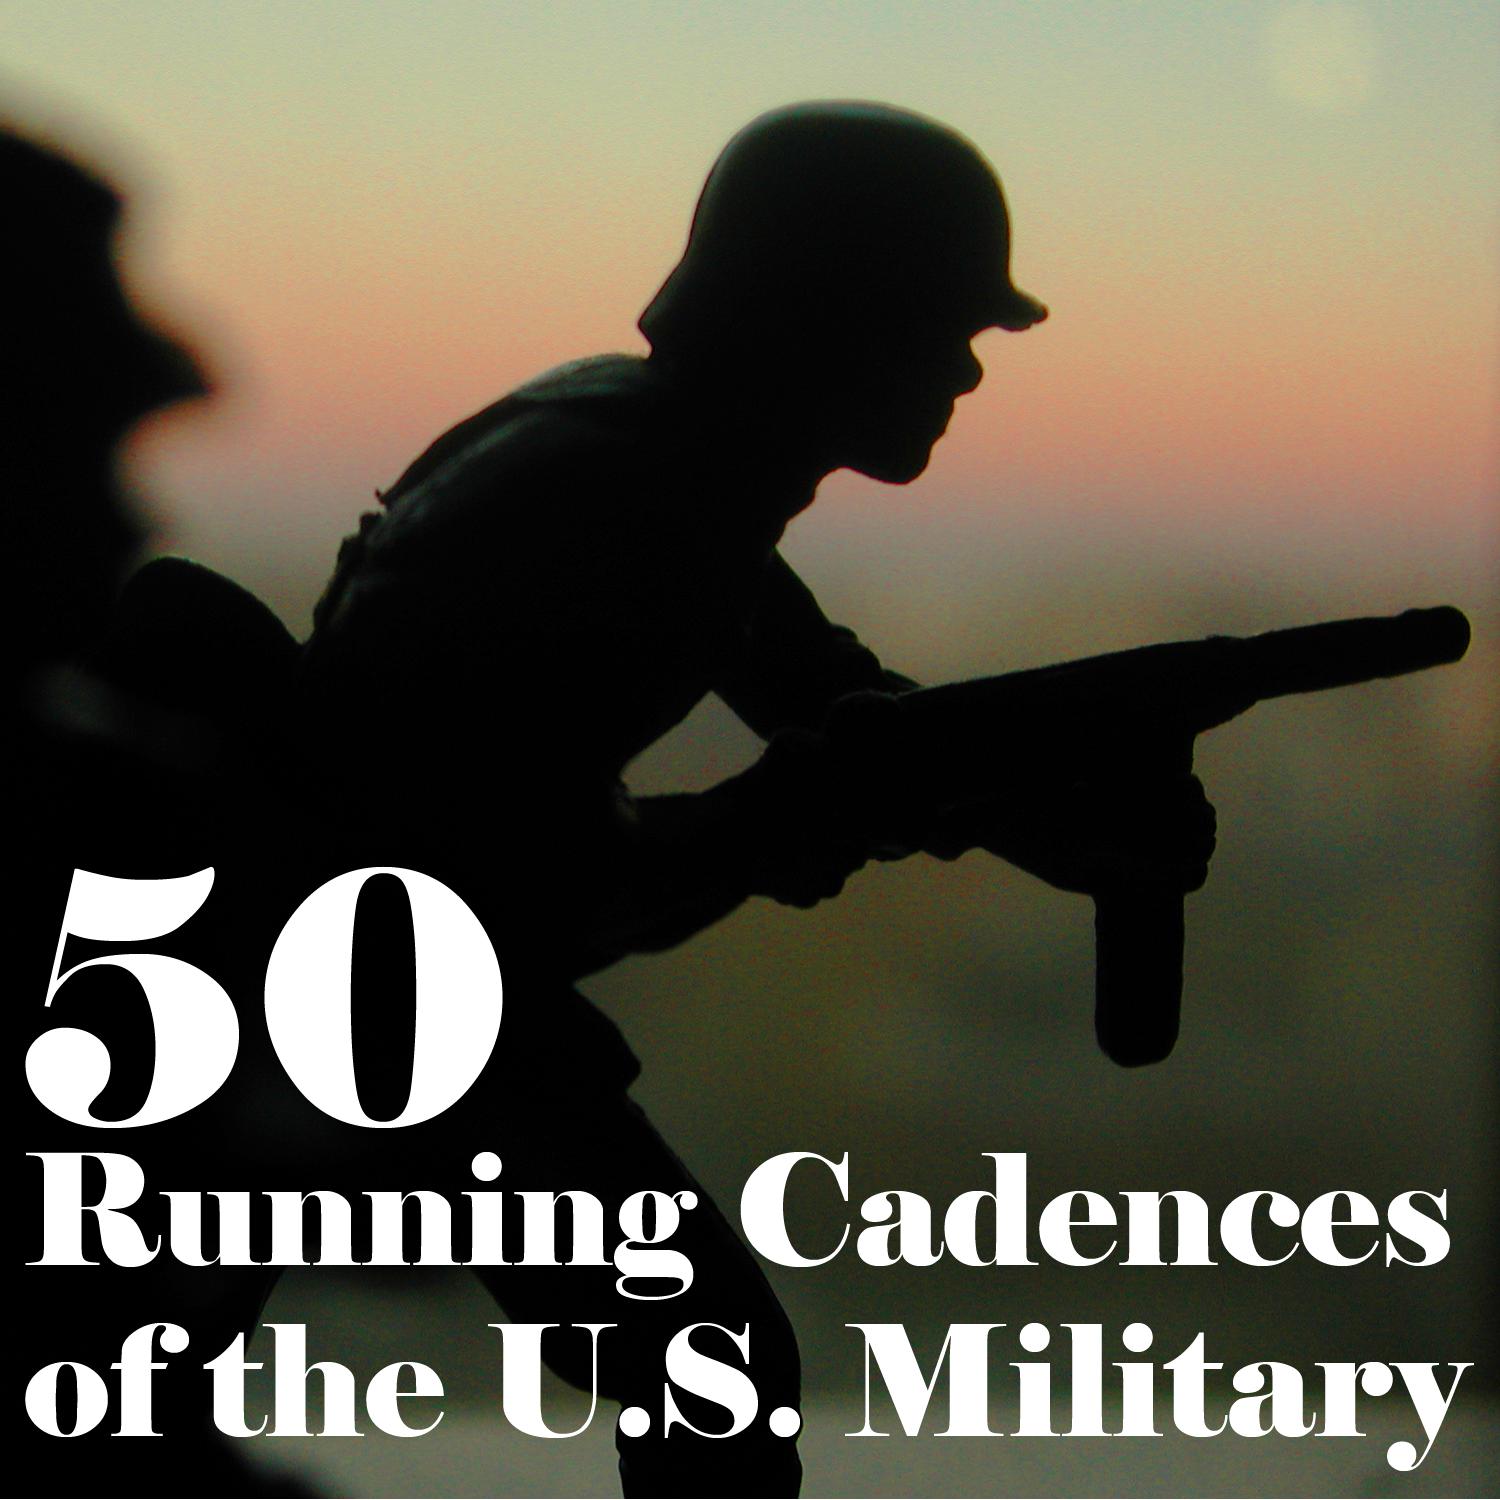 40 Running Cadences of the U.S. Military